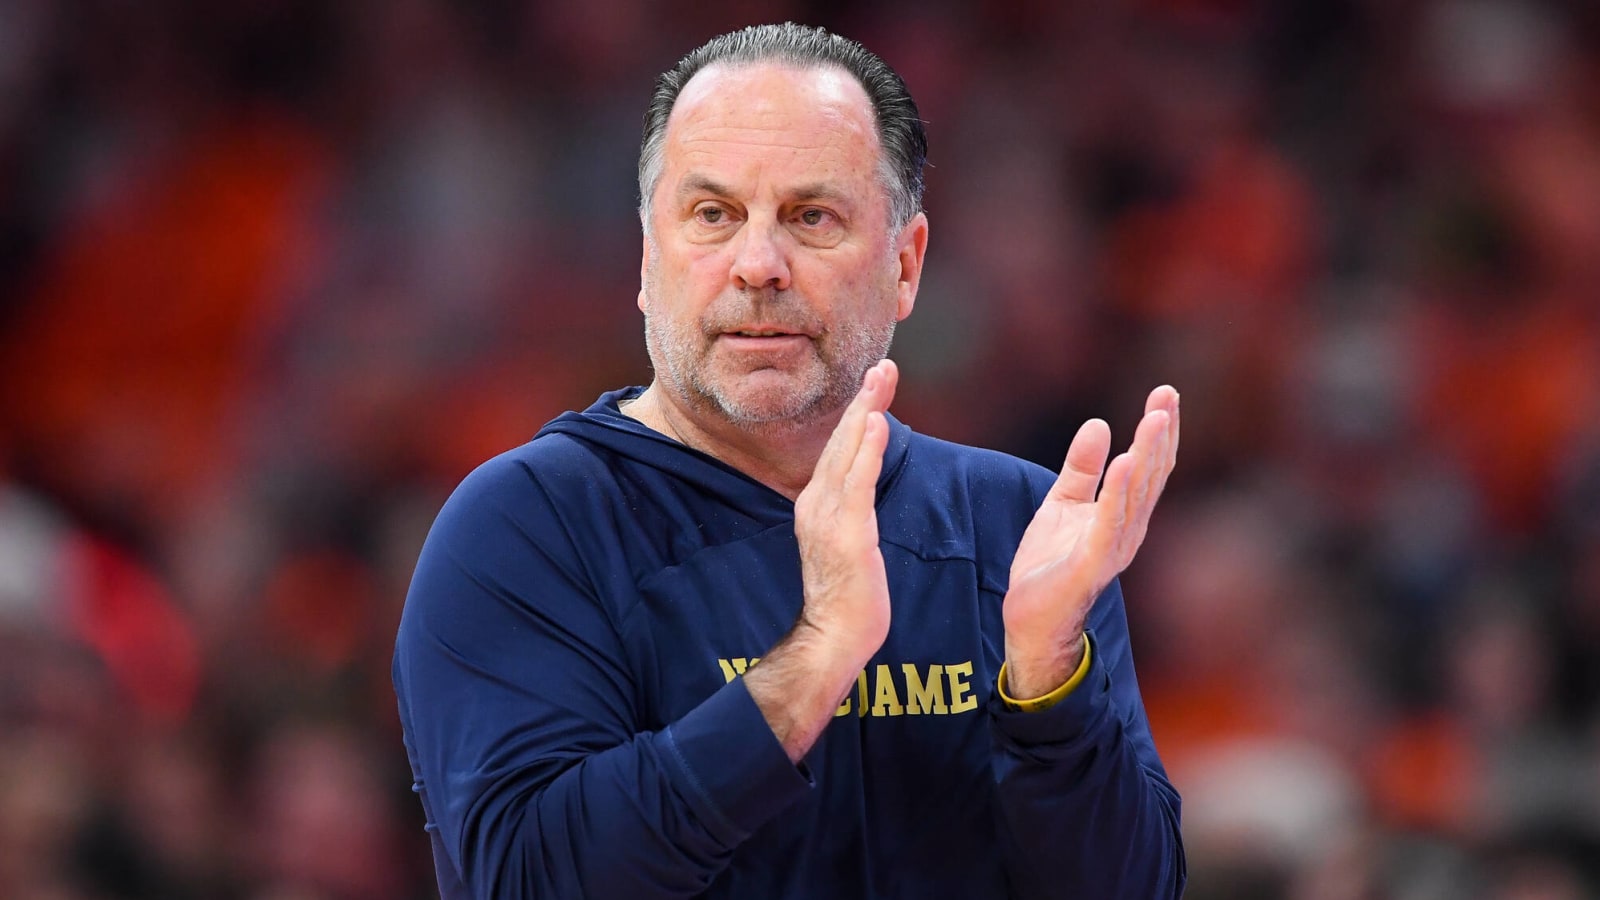 Notre Dame HC Mike Brey to retire at year's end